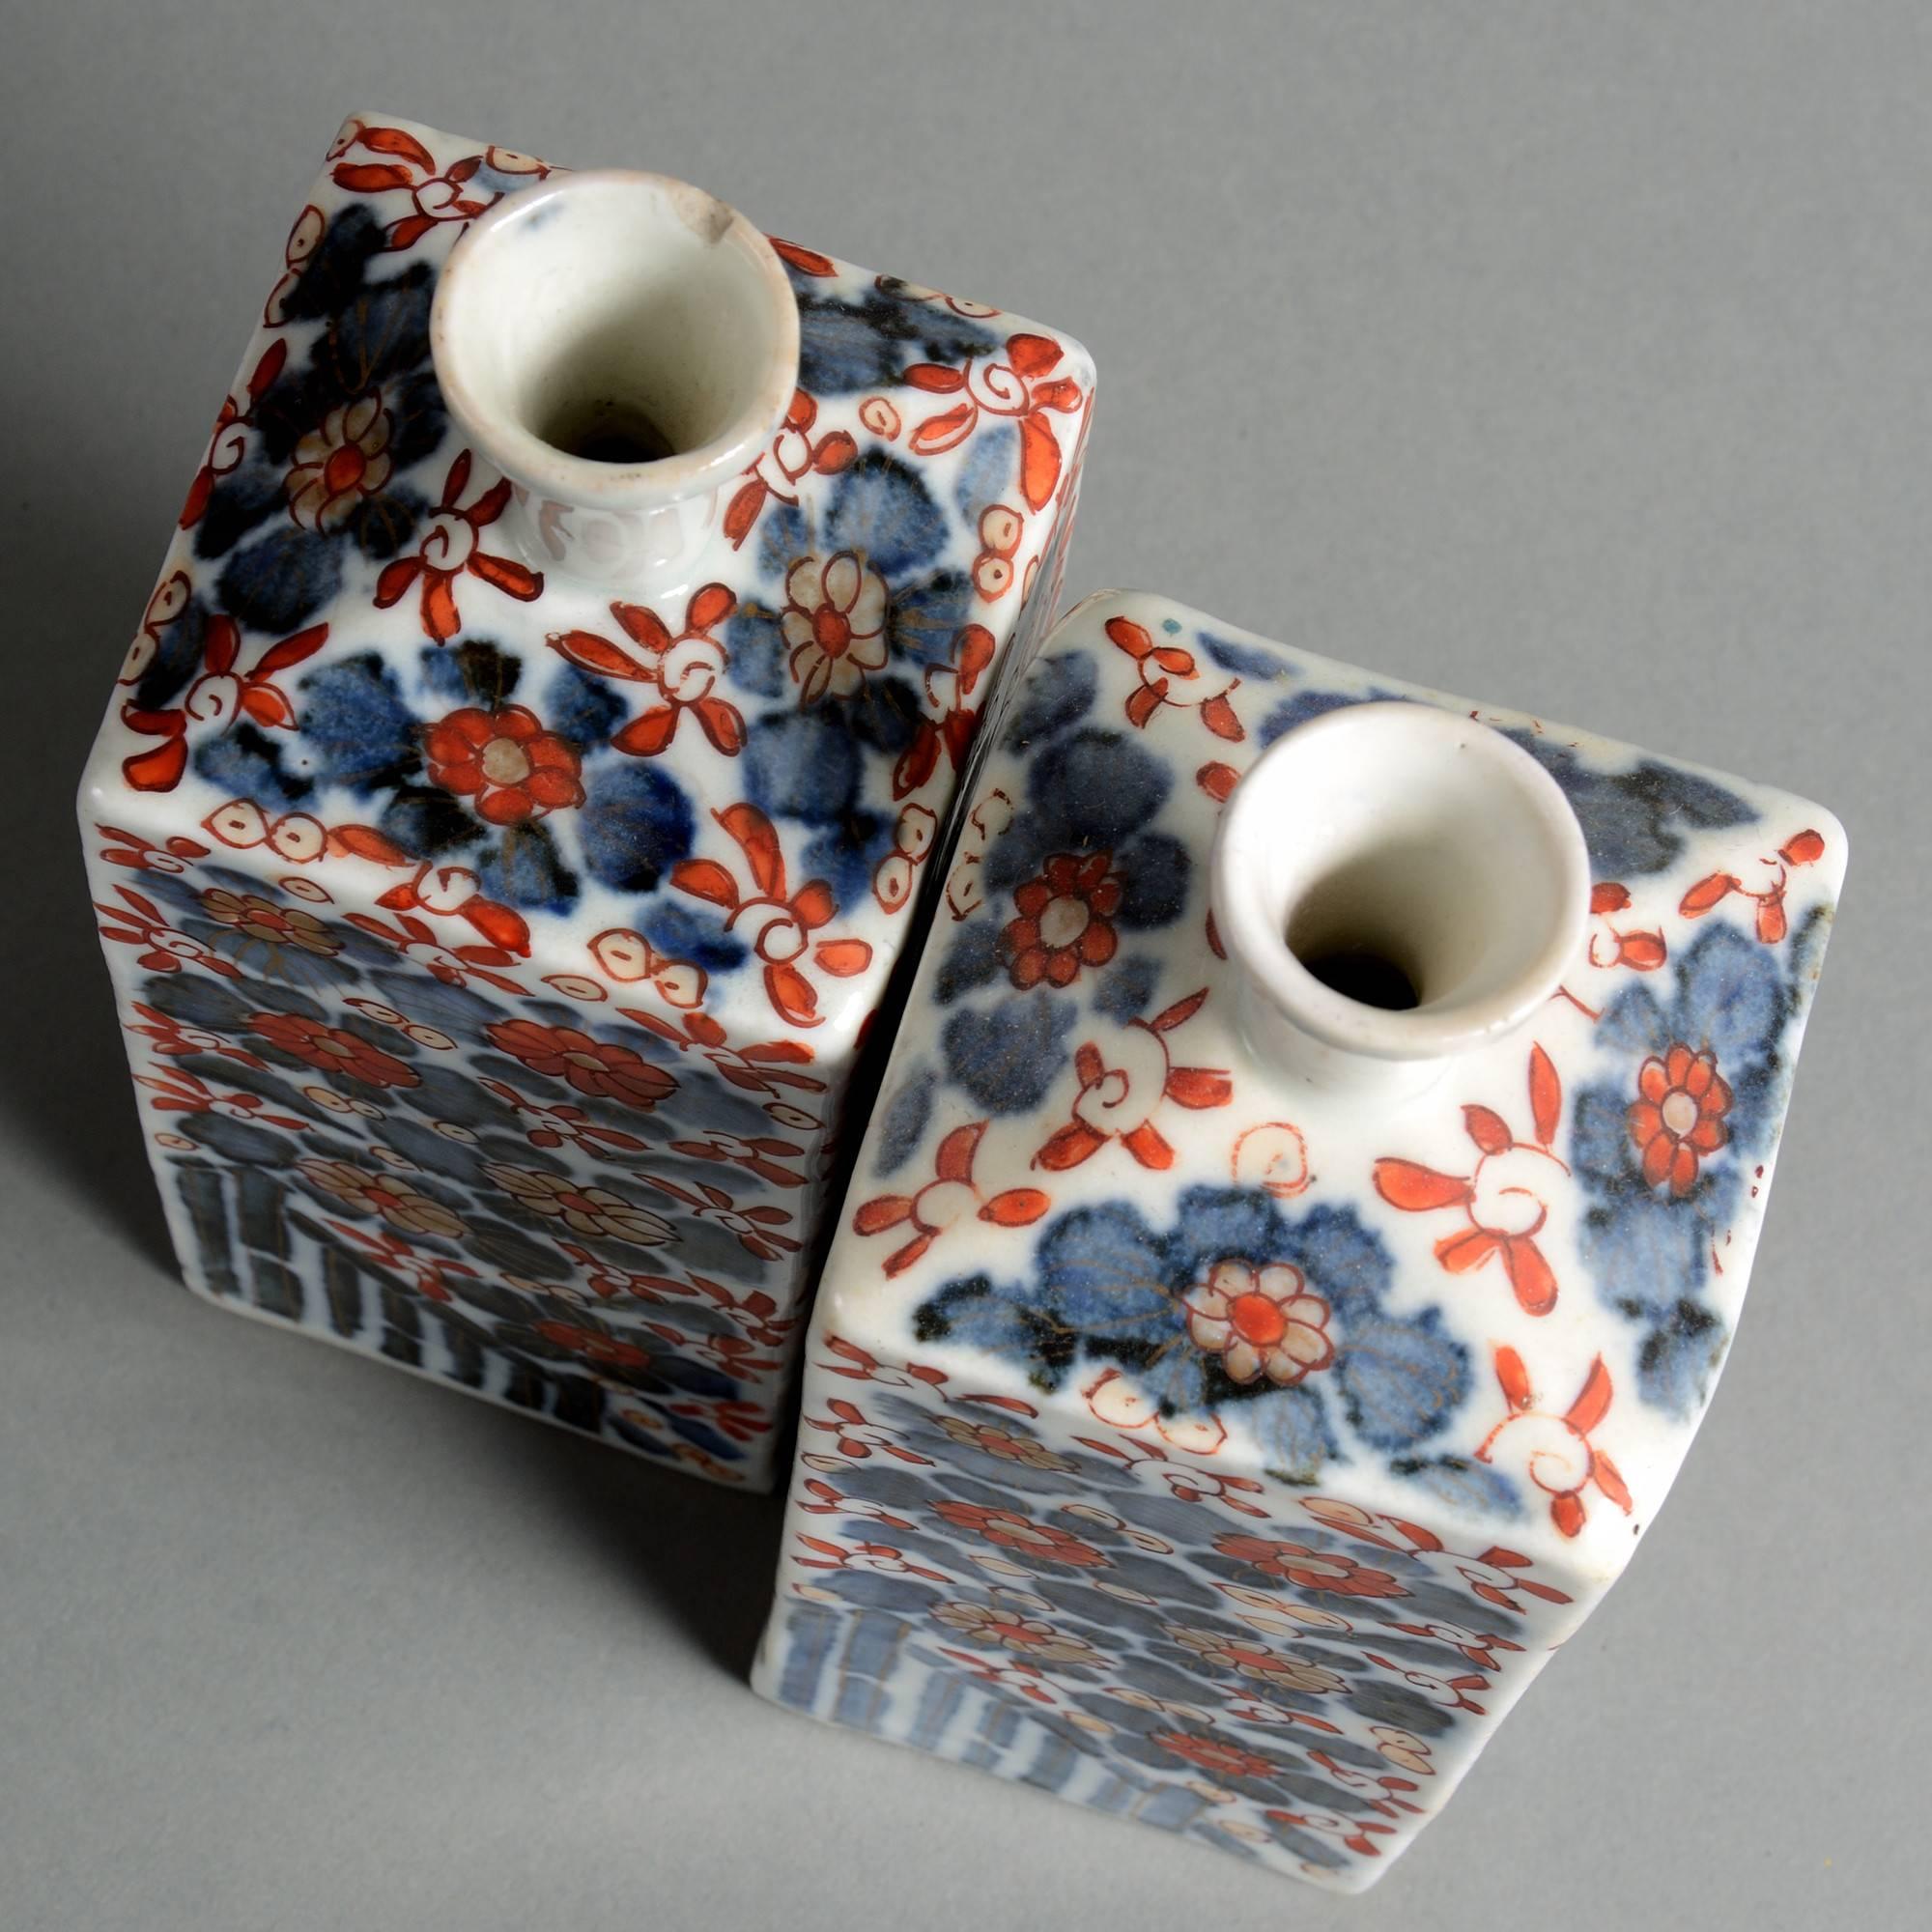 A pair of late 19th century porcelain flasks, of square form, the bodies with floral decoration in red, blue, black and gold glazes upon a white ground,

Meiji period (1868–1912).